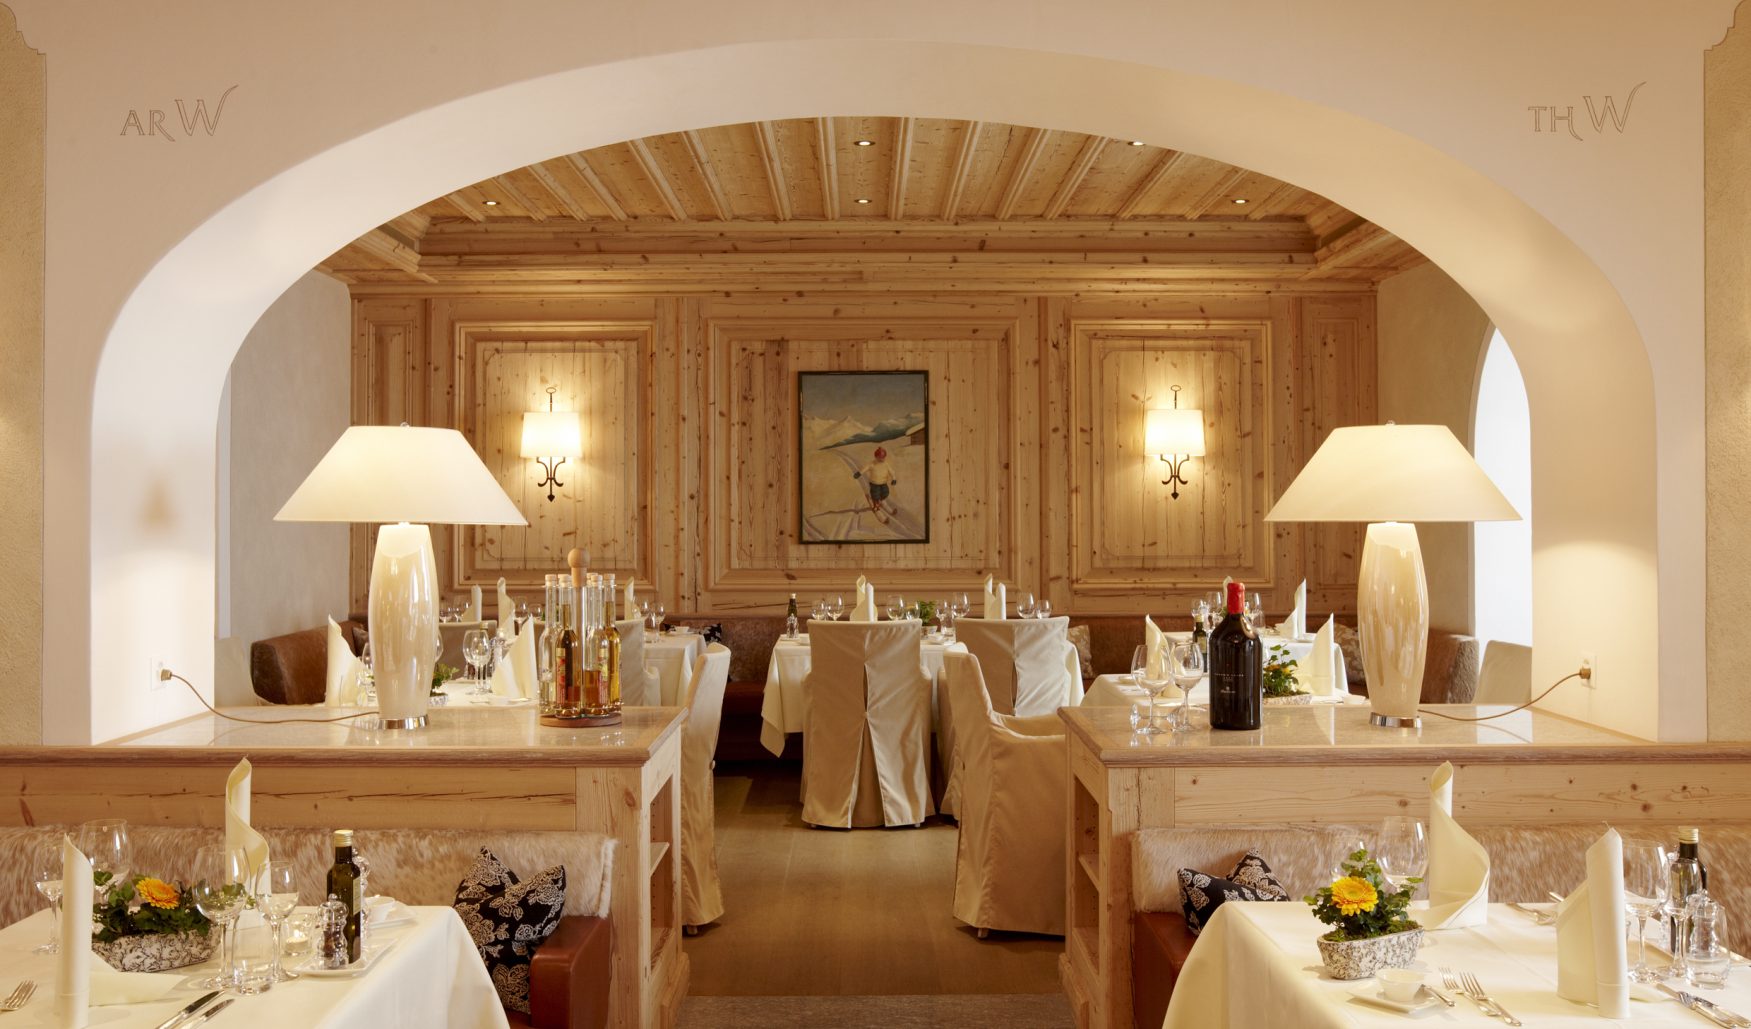 Blick in das Gourmetrestaurant Stueva im Hotel Walther in Pontresina, Foto: hotelwalther.ch